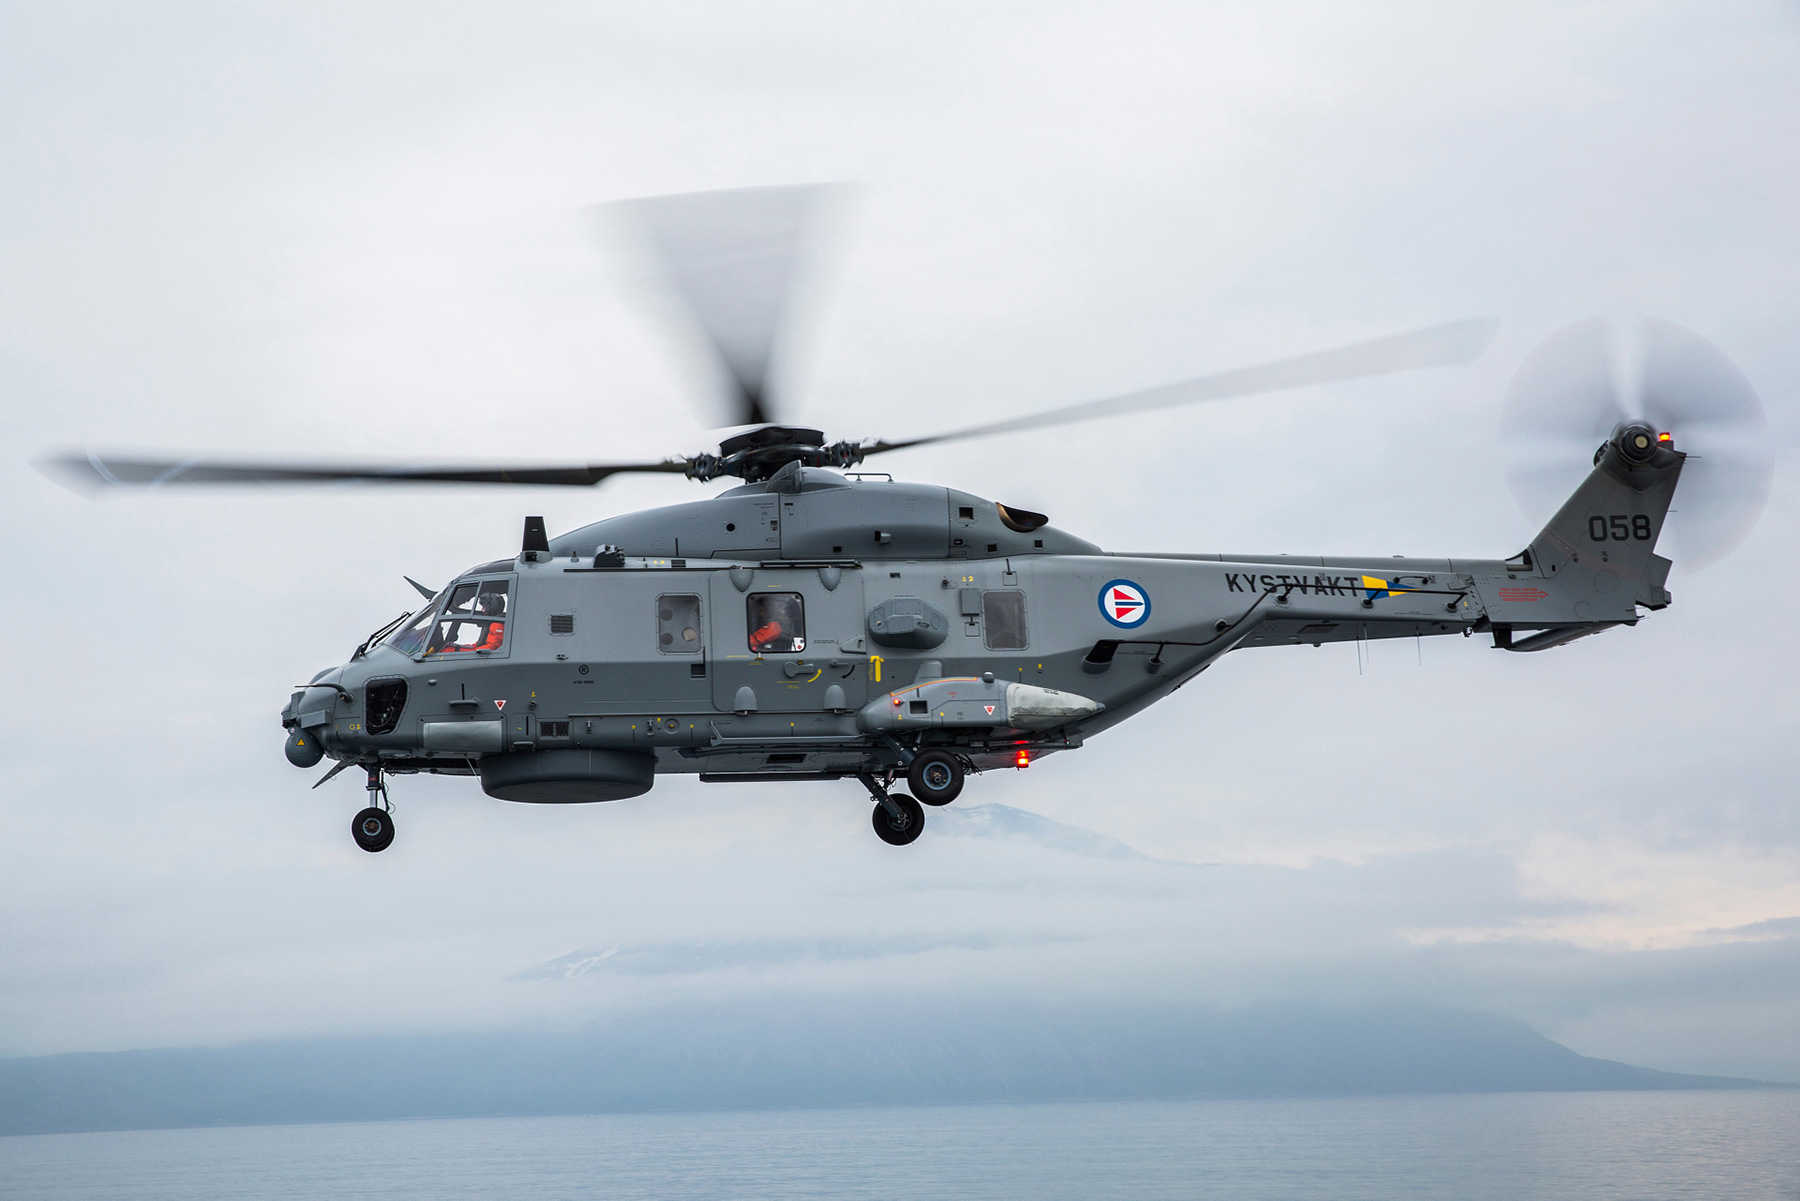 NH90 helicopter in air